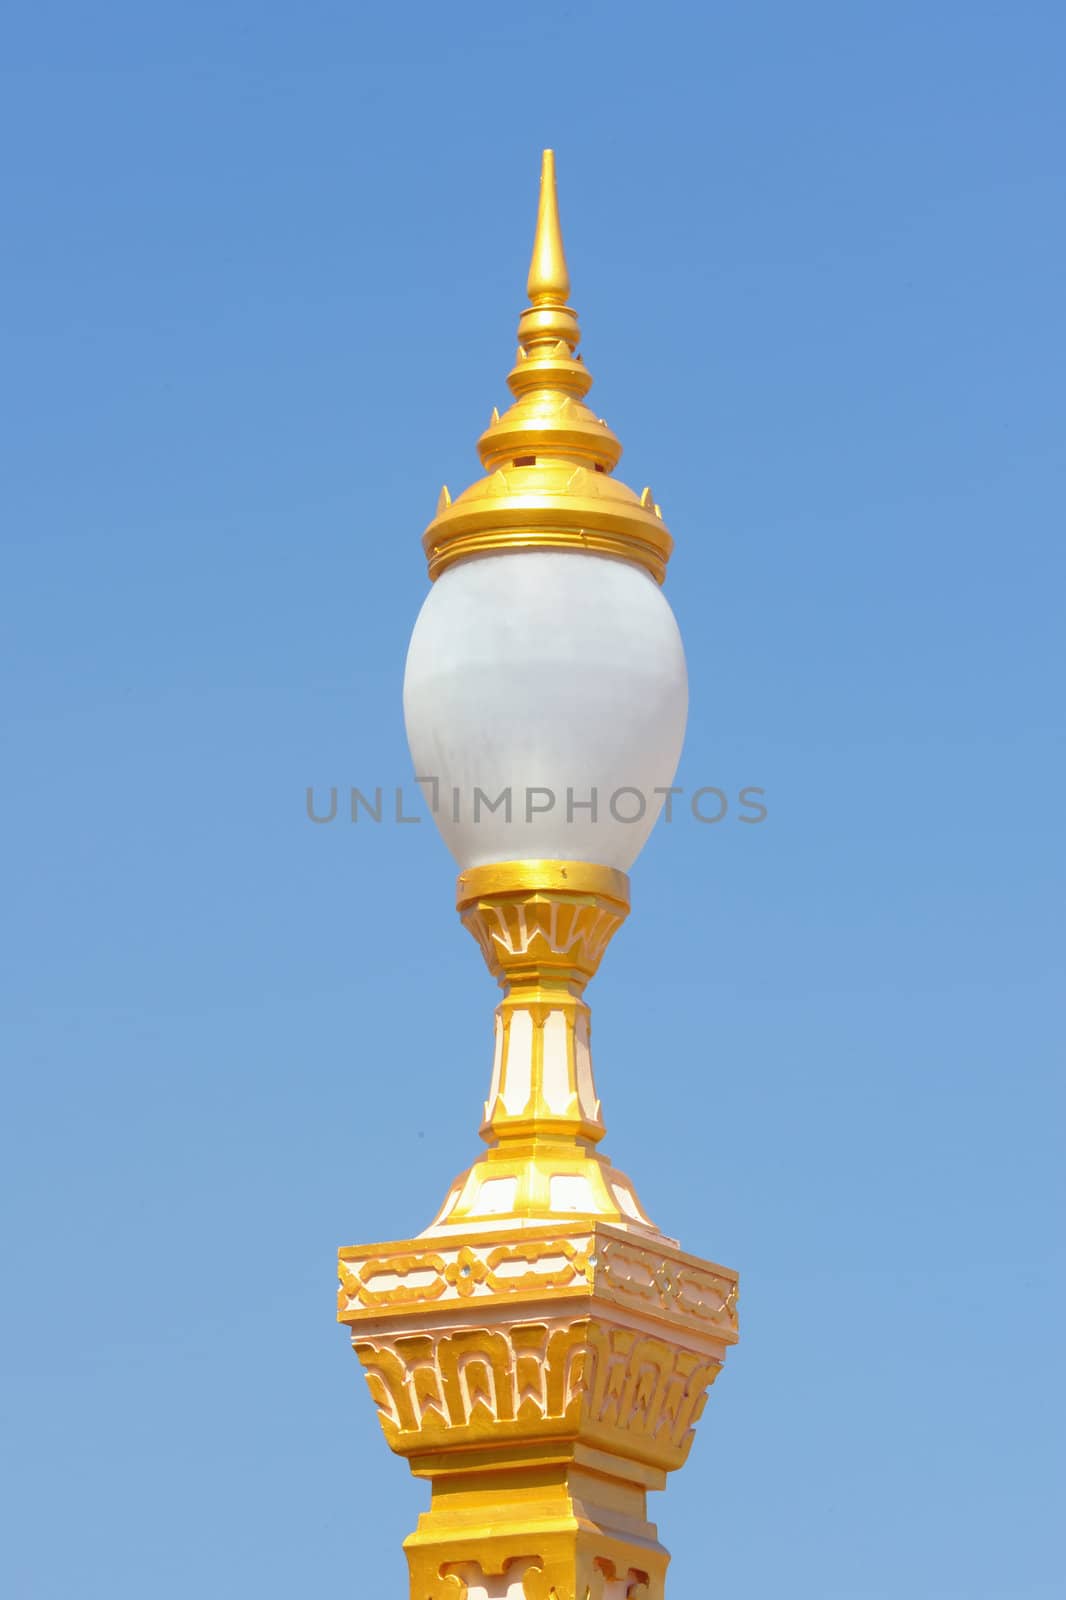 Thai antique lamp with blue sky.This vintage Thai styled for decorated in the park.